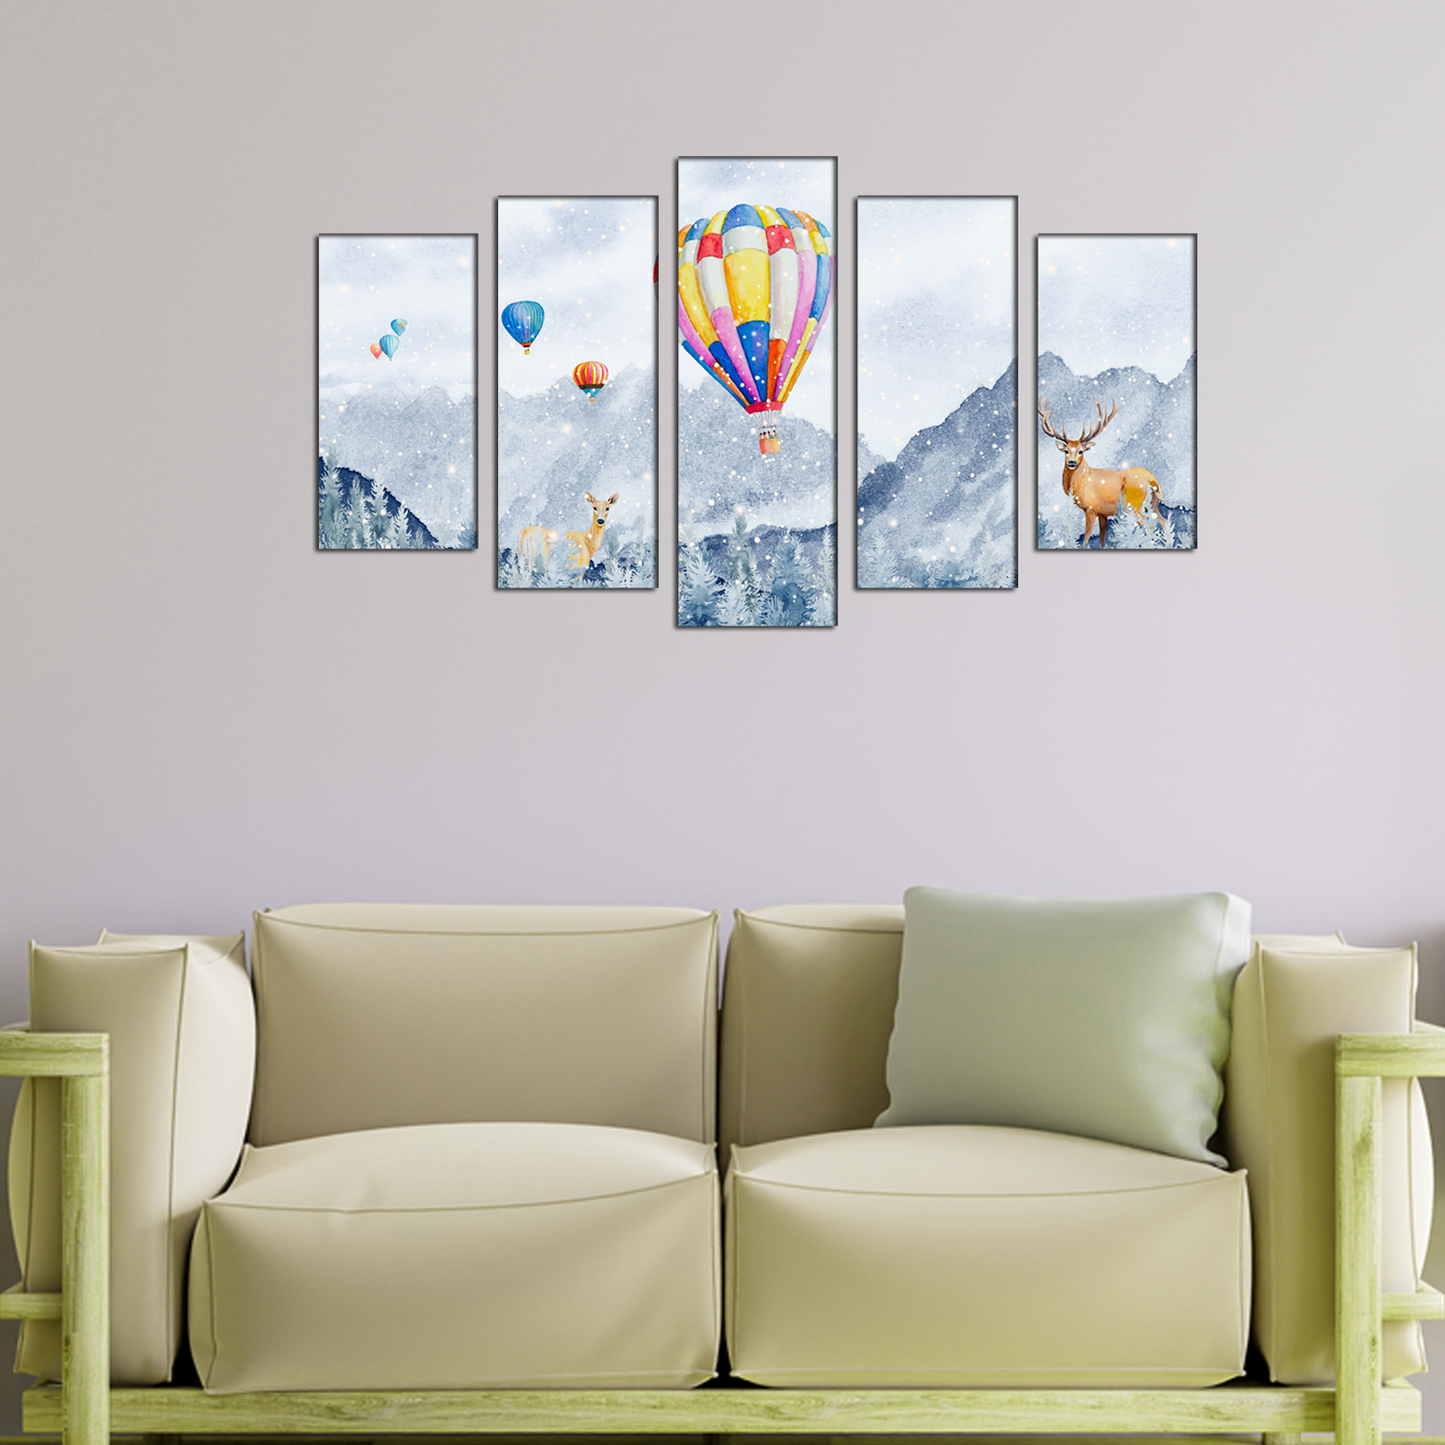 Snow fall in forest and Hot Air balloon MDF wall panel painting